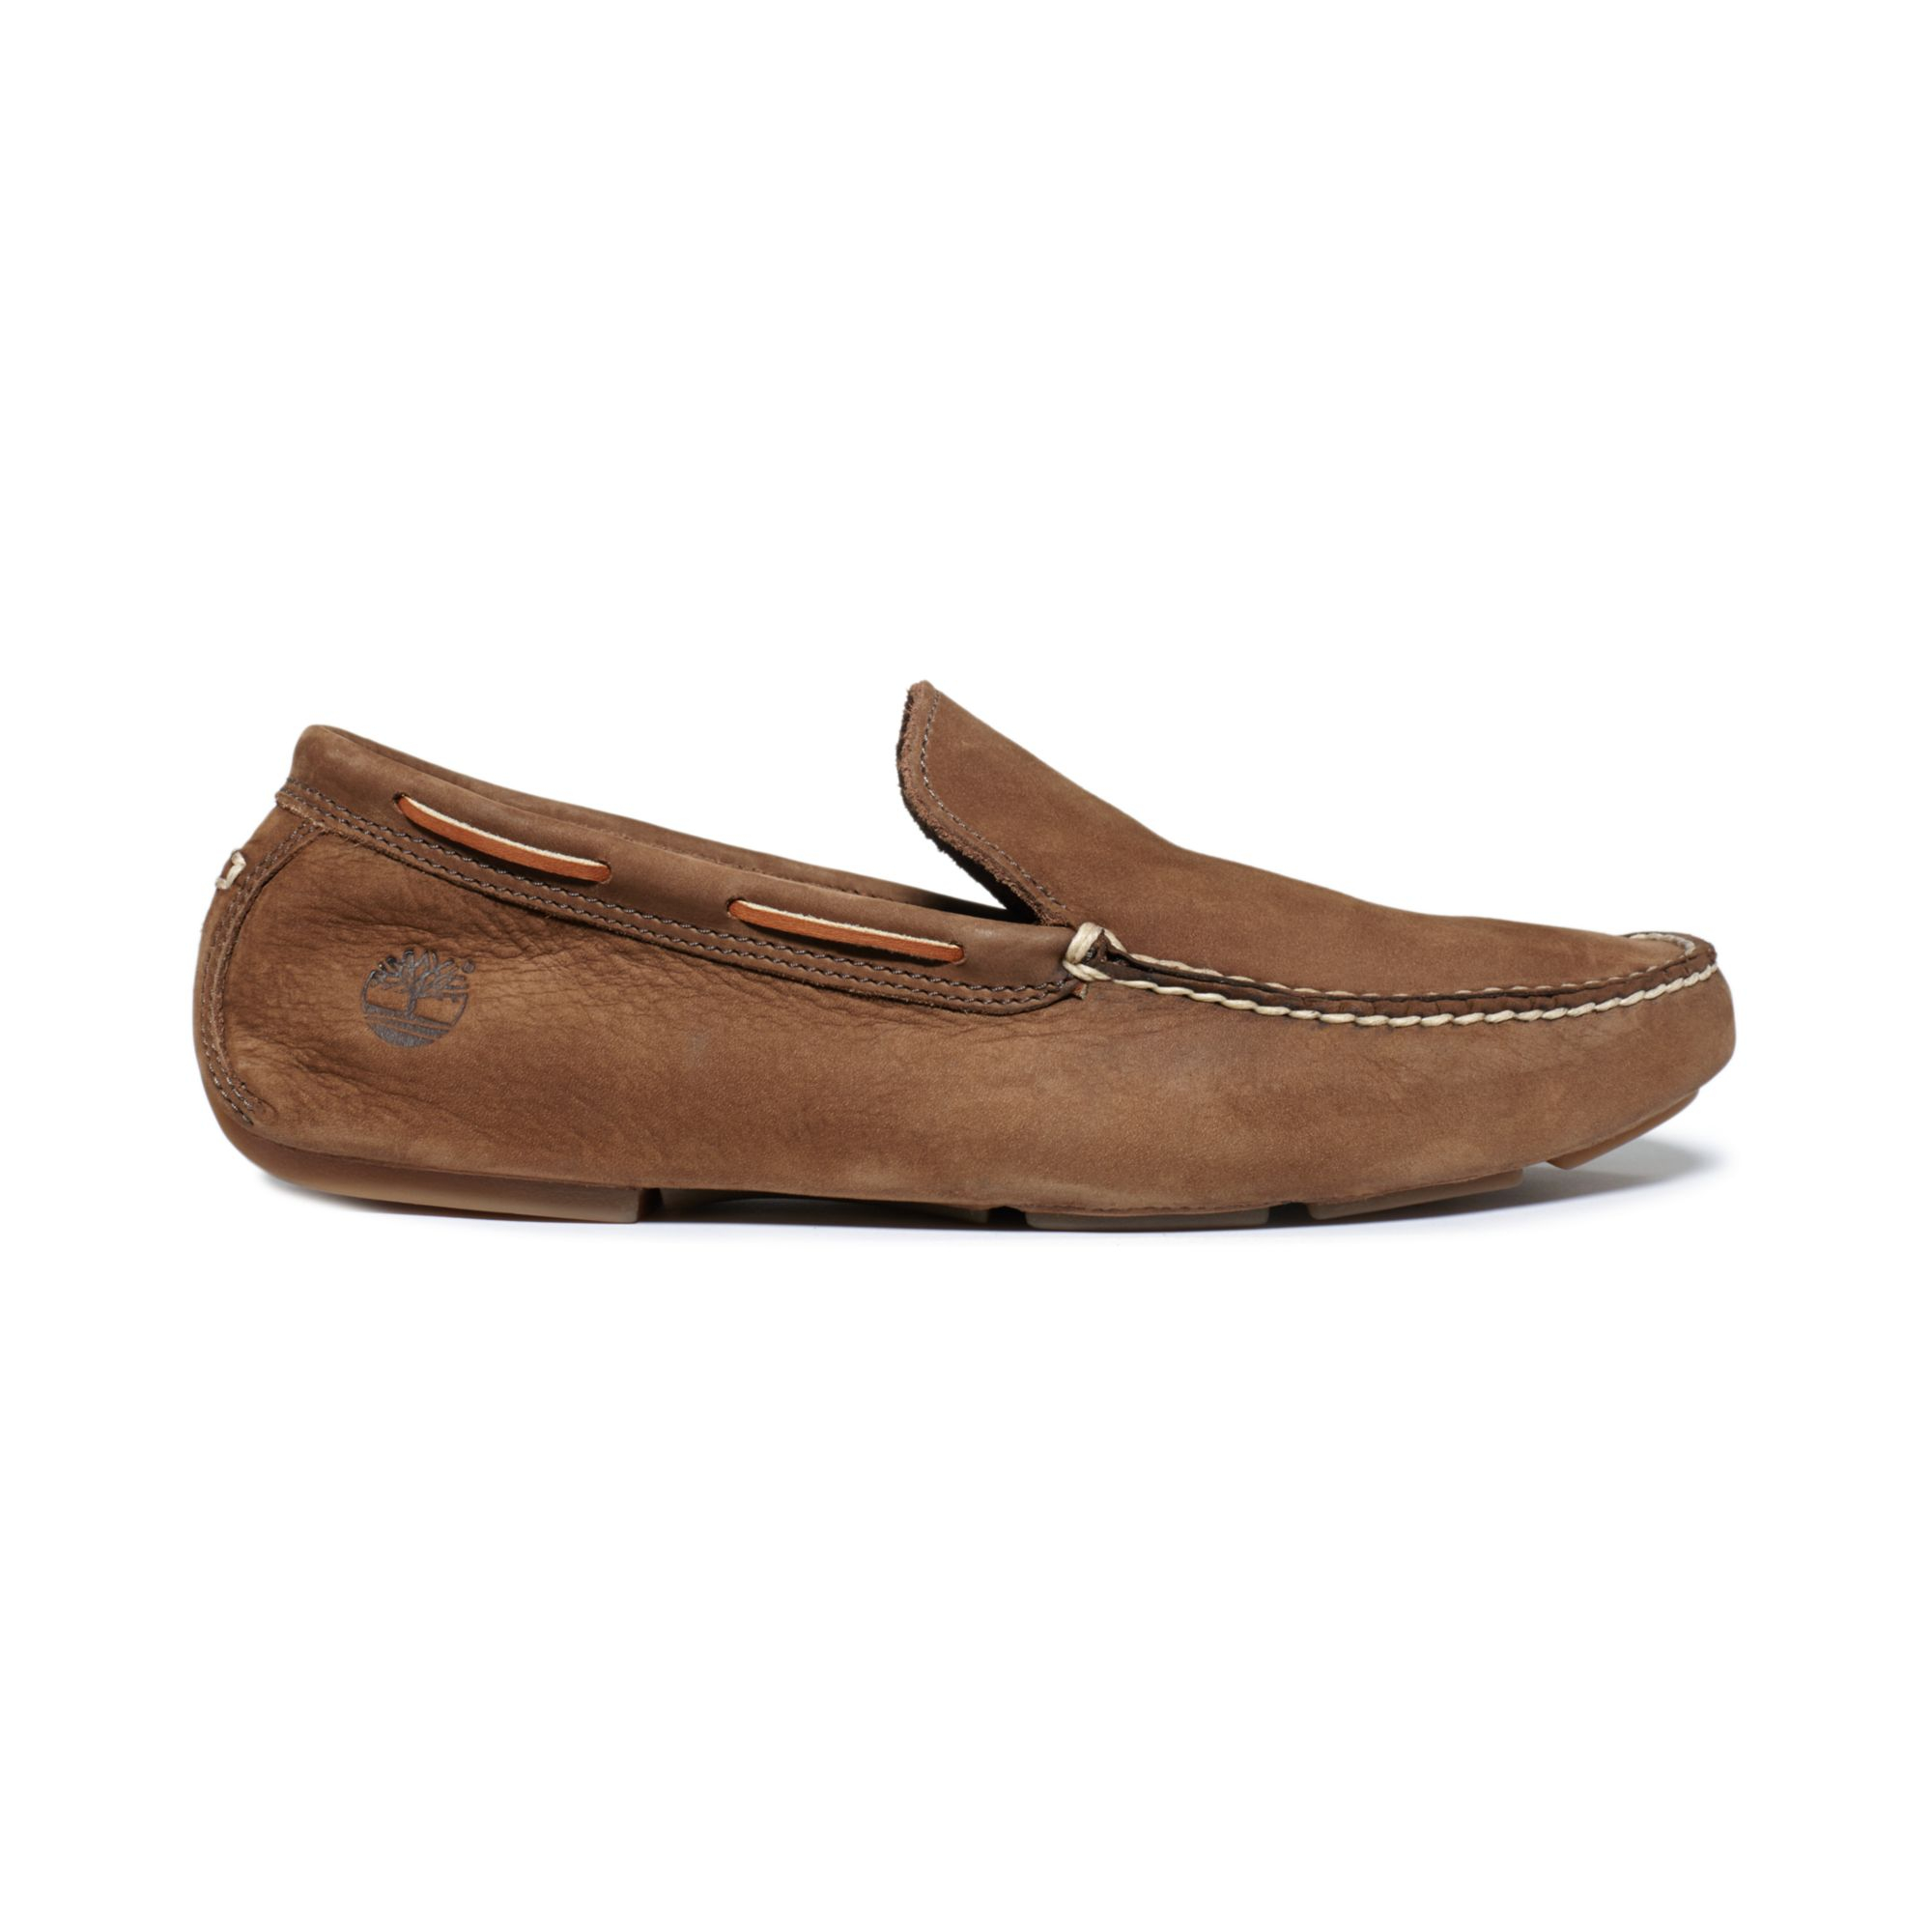 Timberland Venetian Loafer Greece, SAVE 32% - aveclumiere.com